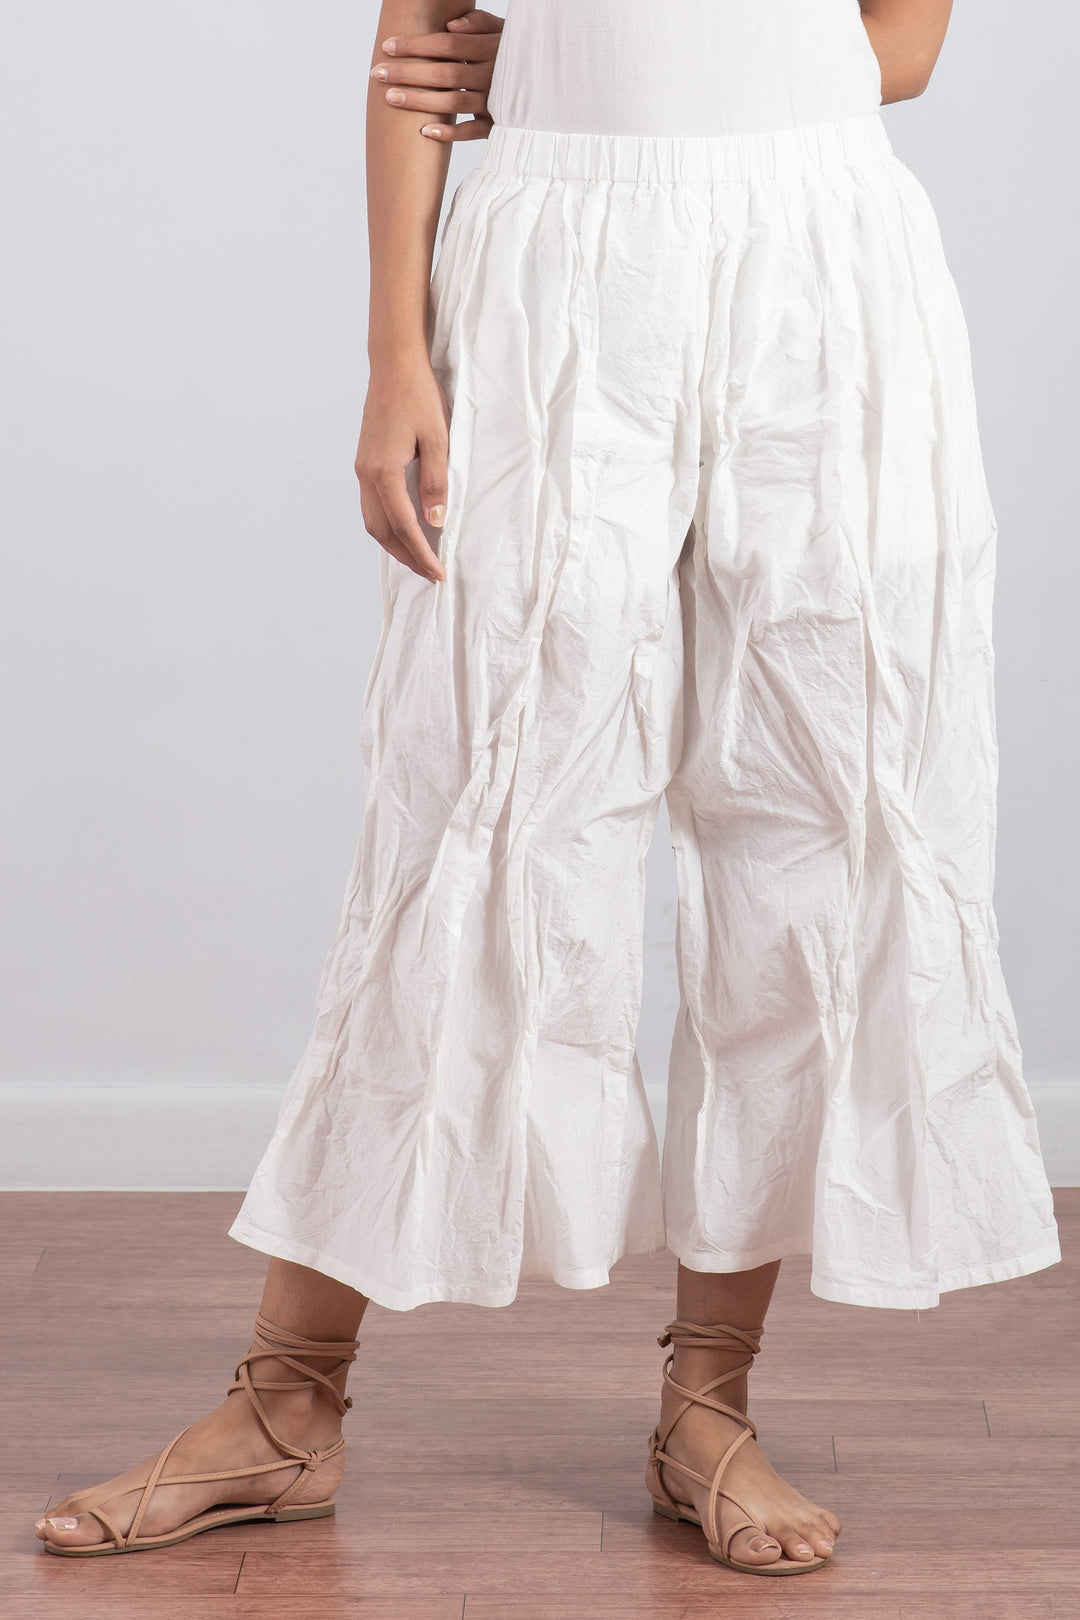 DYED COTTON SILK HEAVY VOILE WAVY TUCKED PANTS - dh1635-wht -